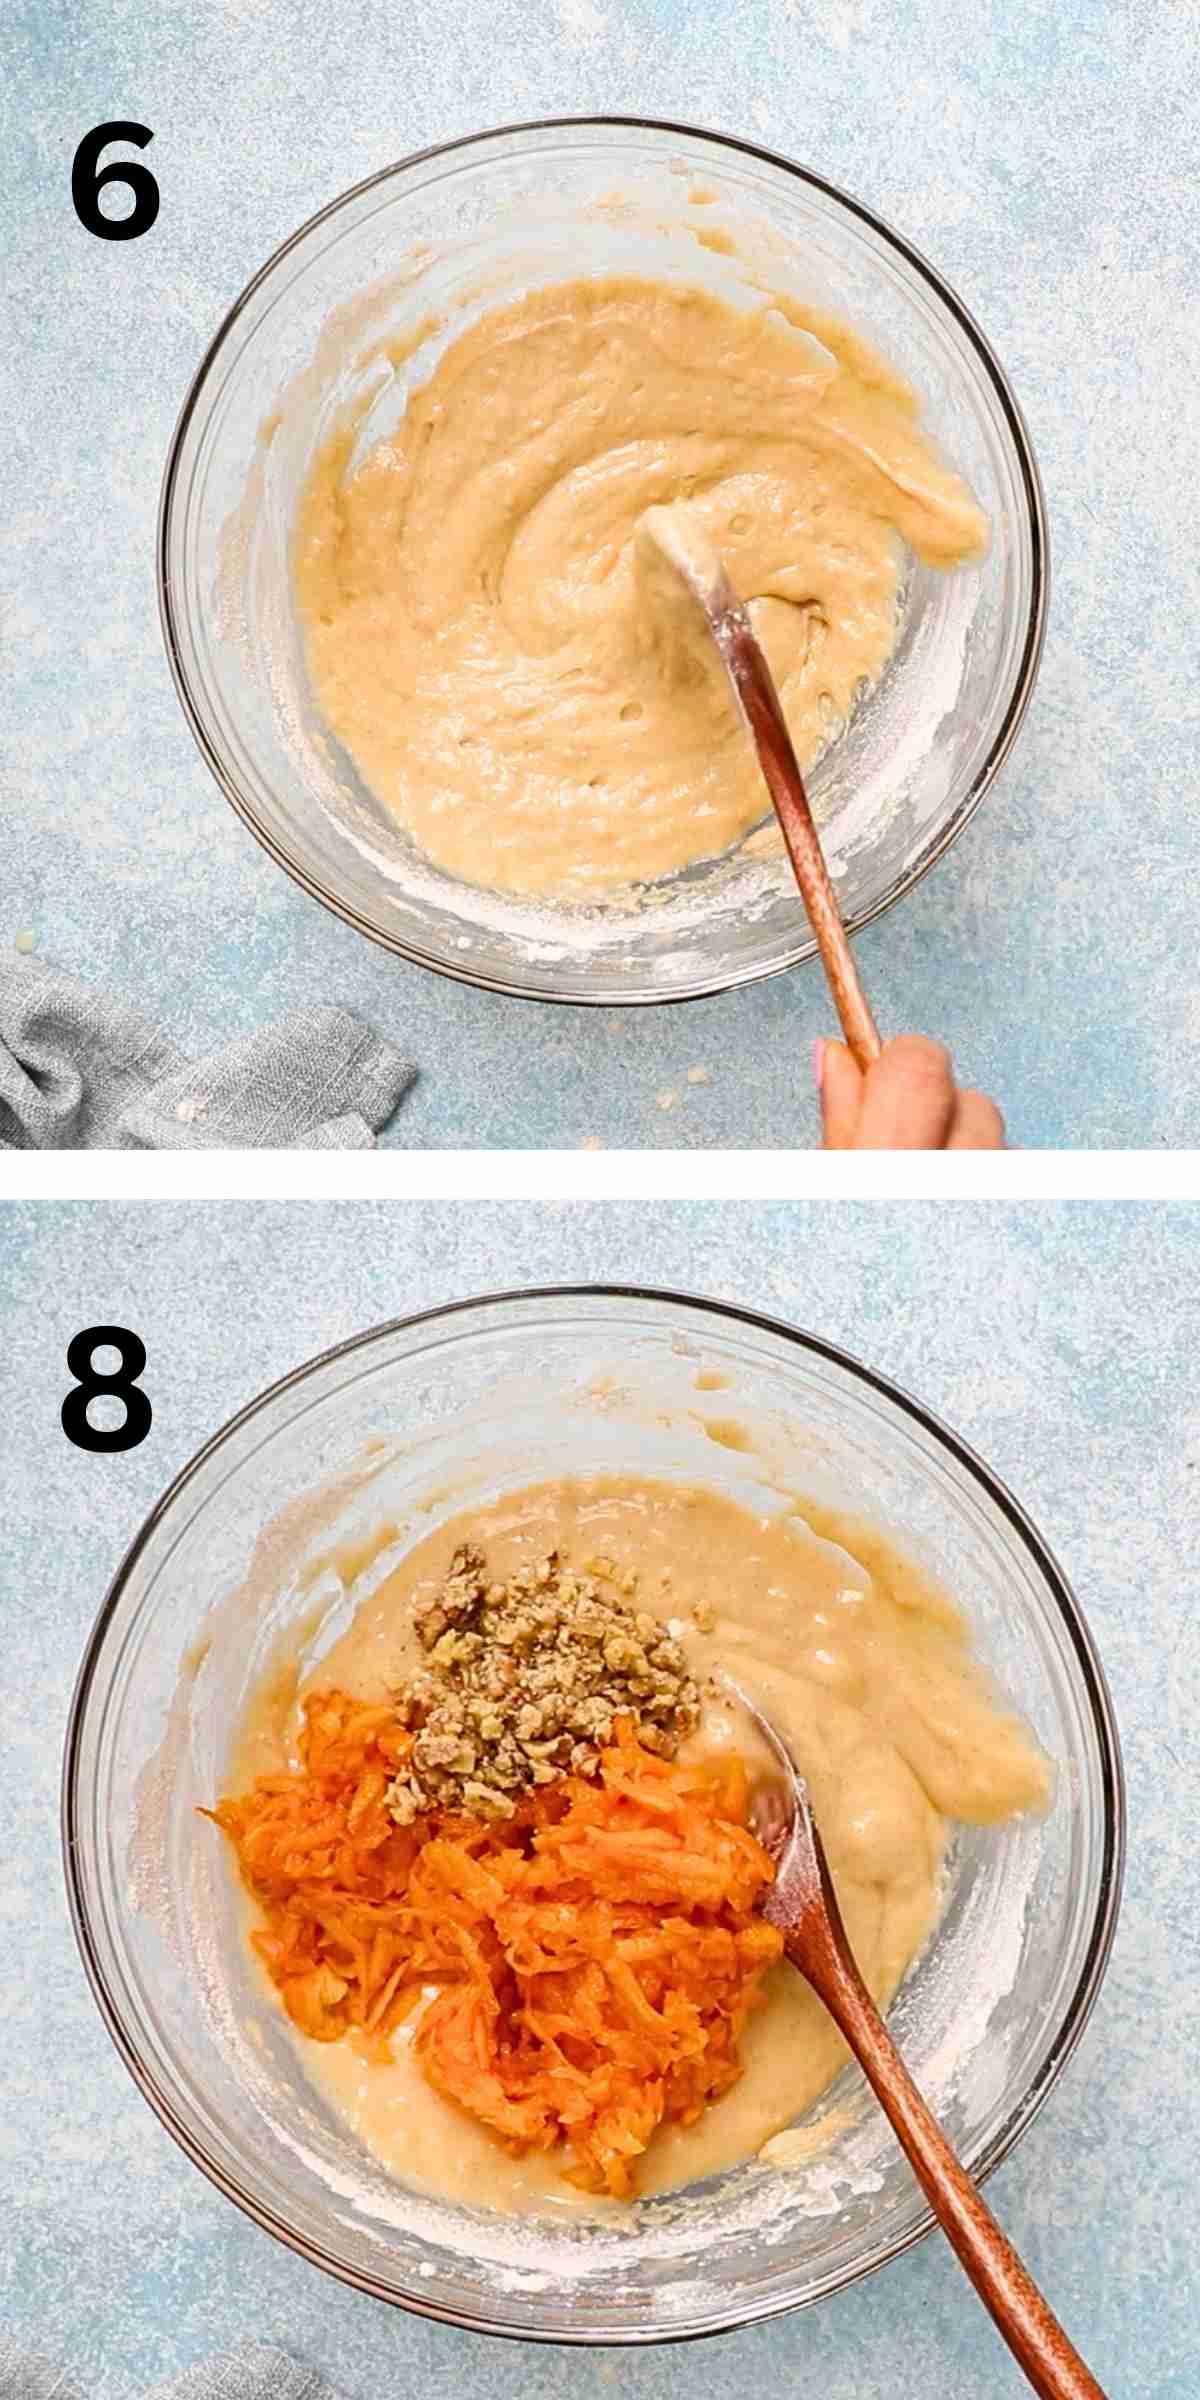 2 photo collage of prepping muffin batter in a glass bowl.